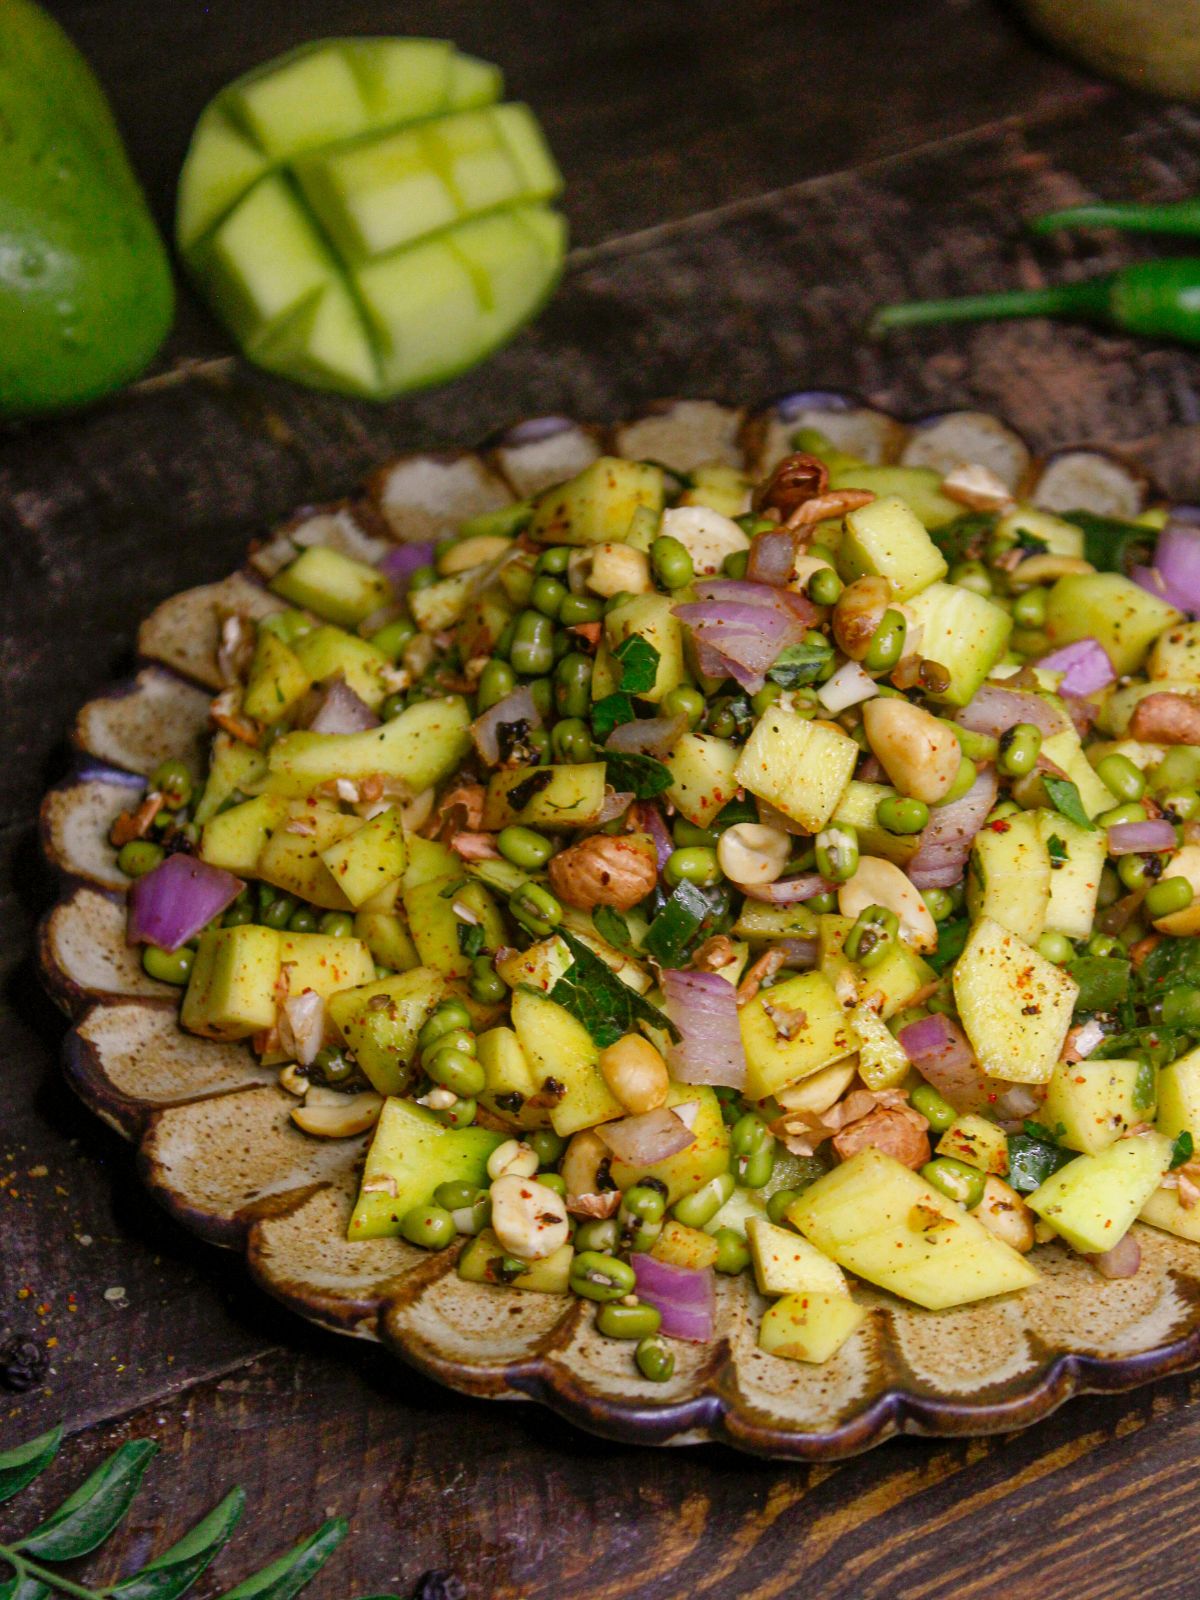 Spicy South Indian Raw Mango Salad with Sprouts